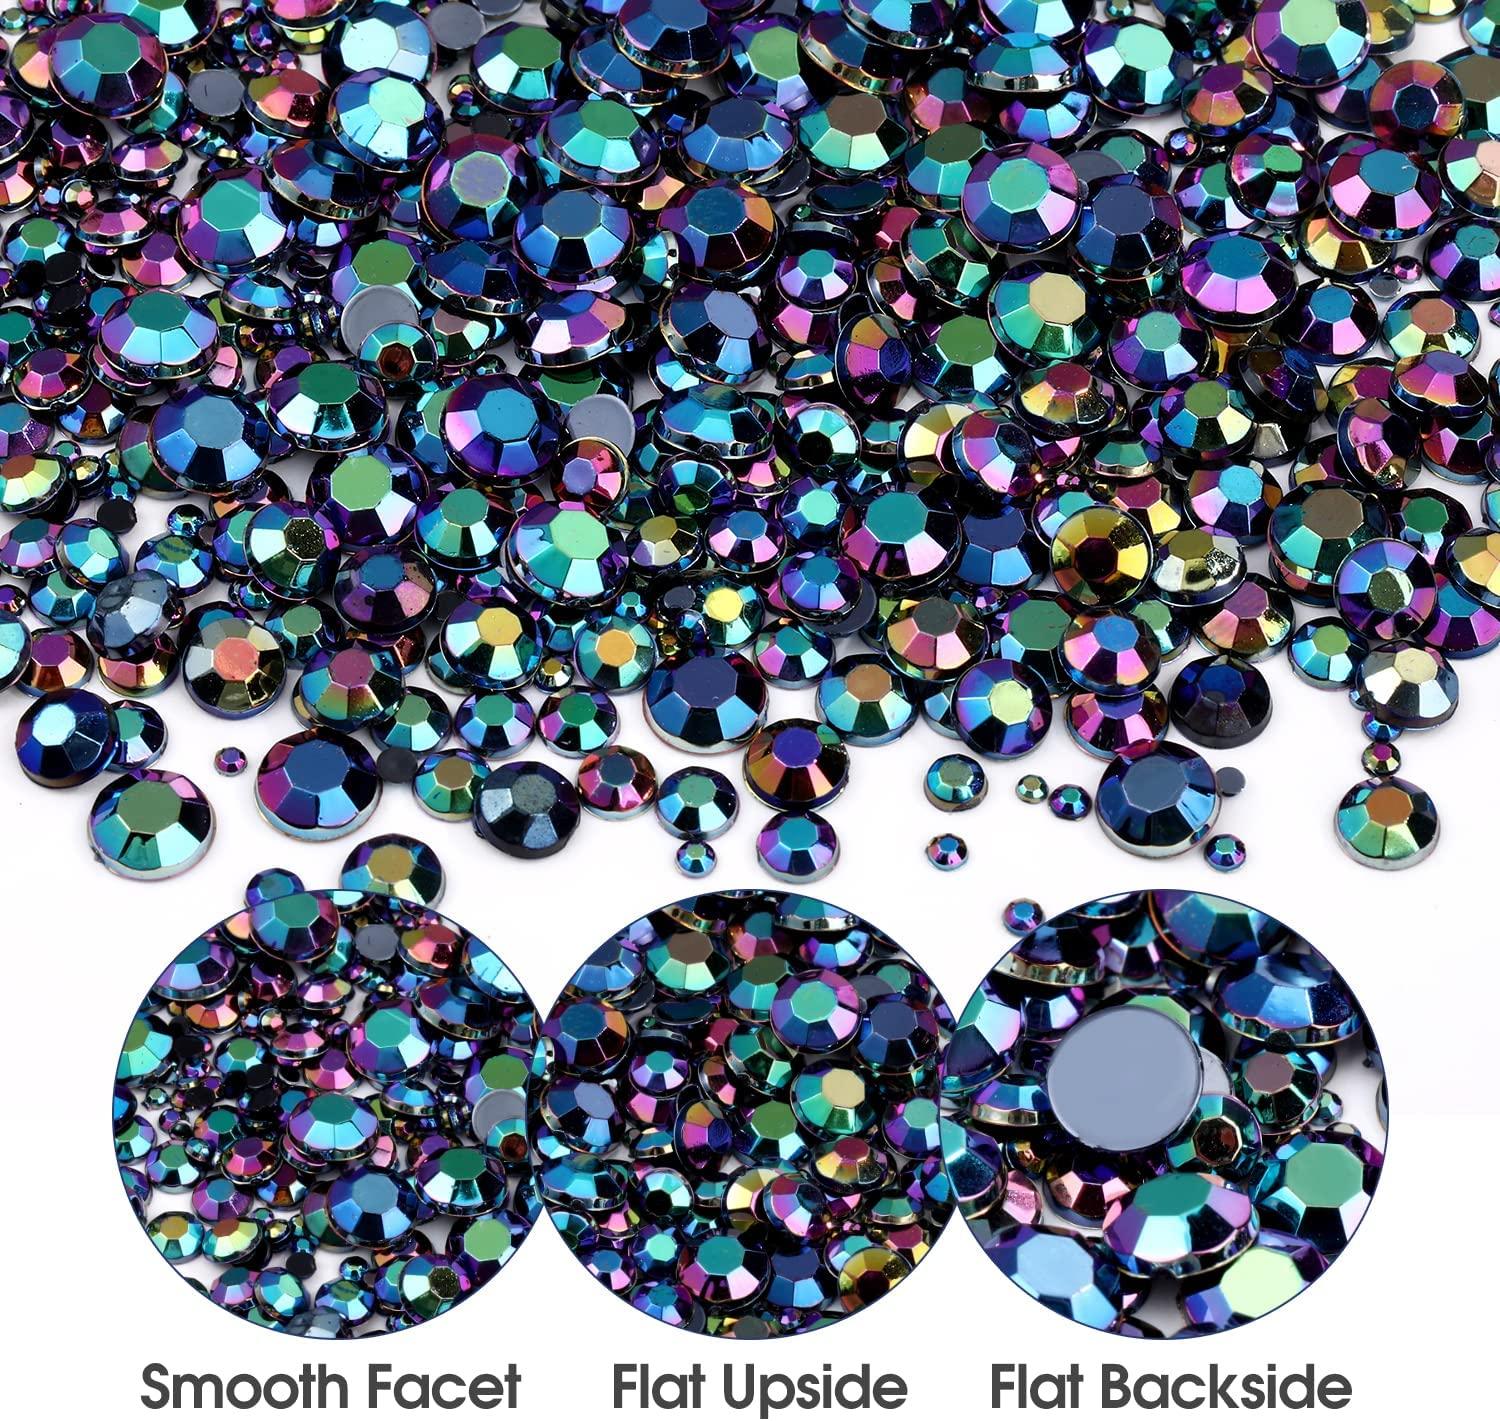 5320 Pieces Flat Back Gems Round Crystal Rhinestones 6 Sizes (1.5-6 mm)  with Pick Up Tweezer and Rhinestones Picking Pen for Crafts Nail Face Art  Clothes Shoes Bags DIY (BlackAB) Black AB